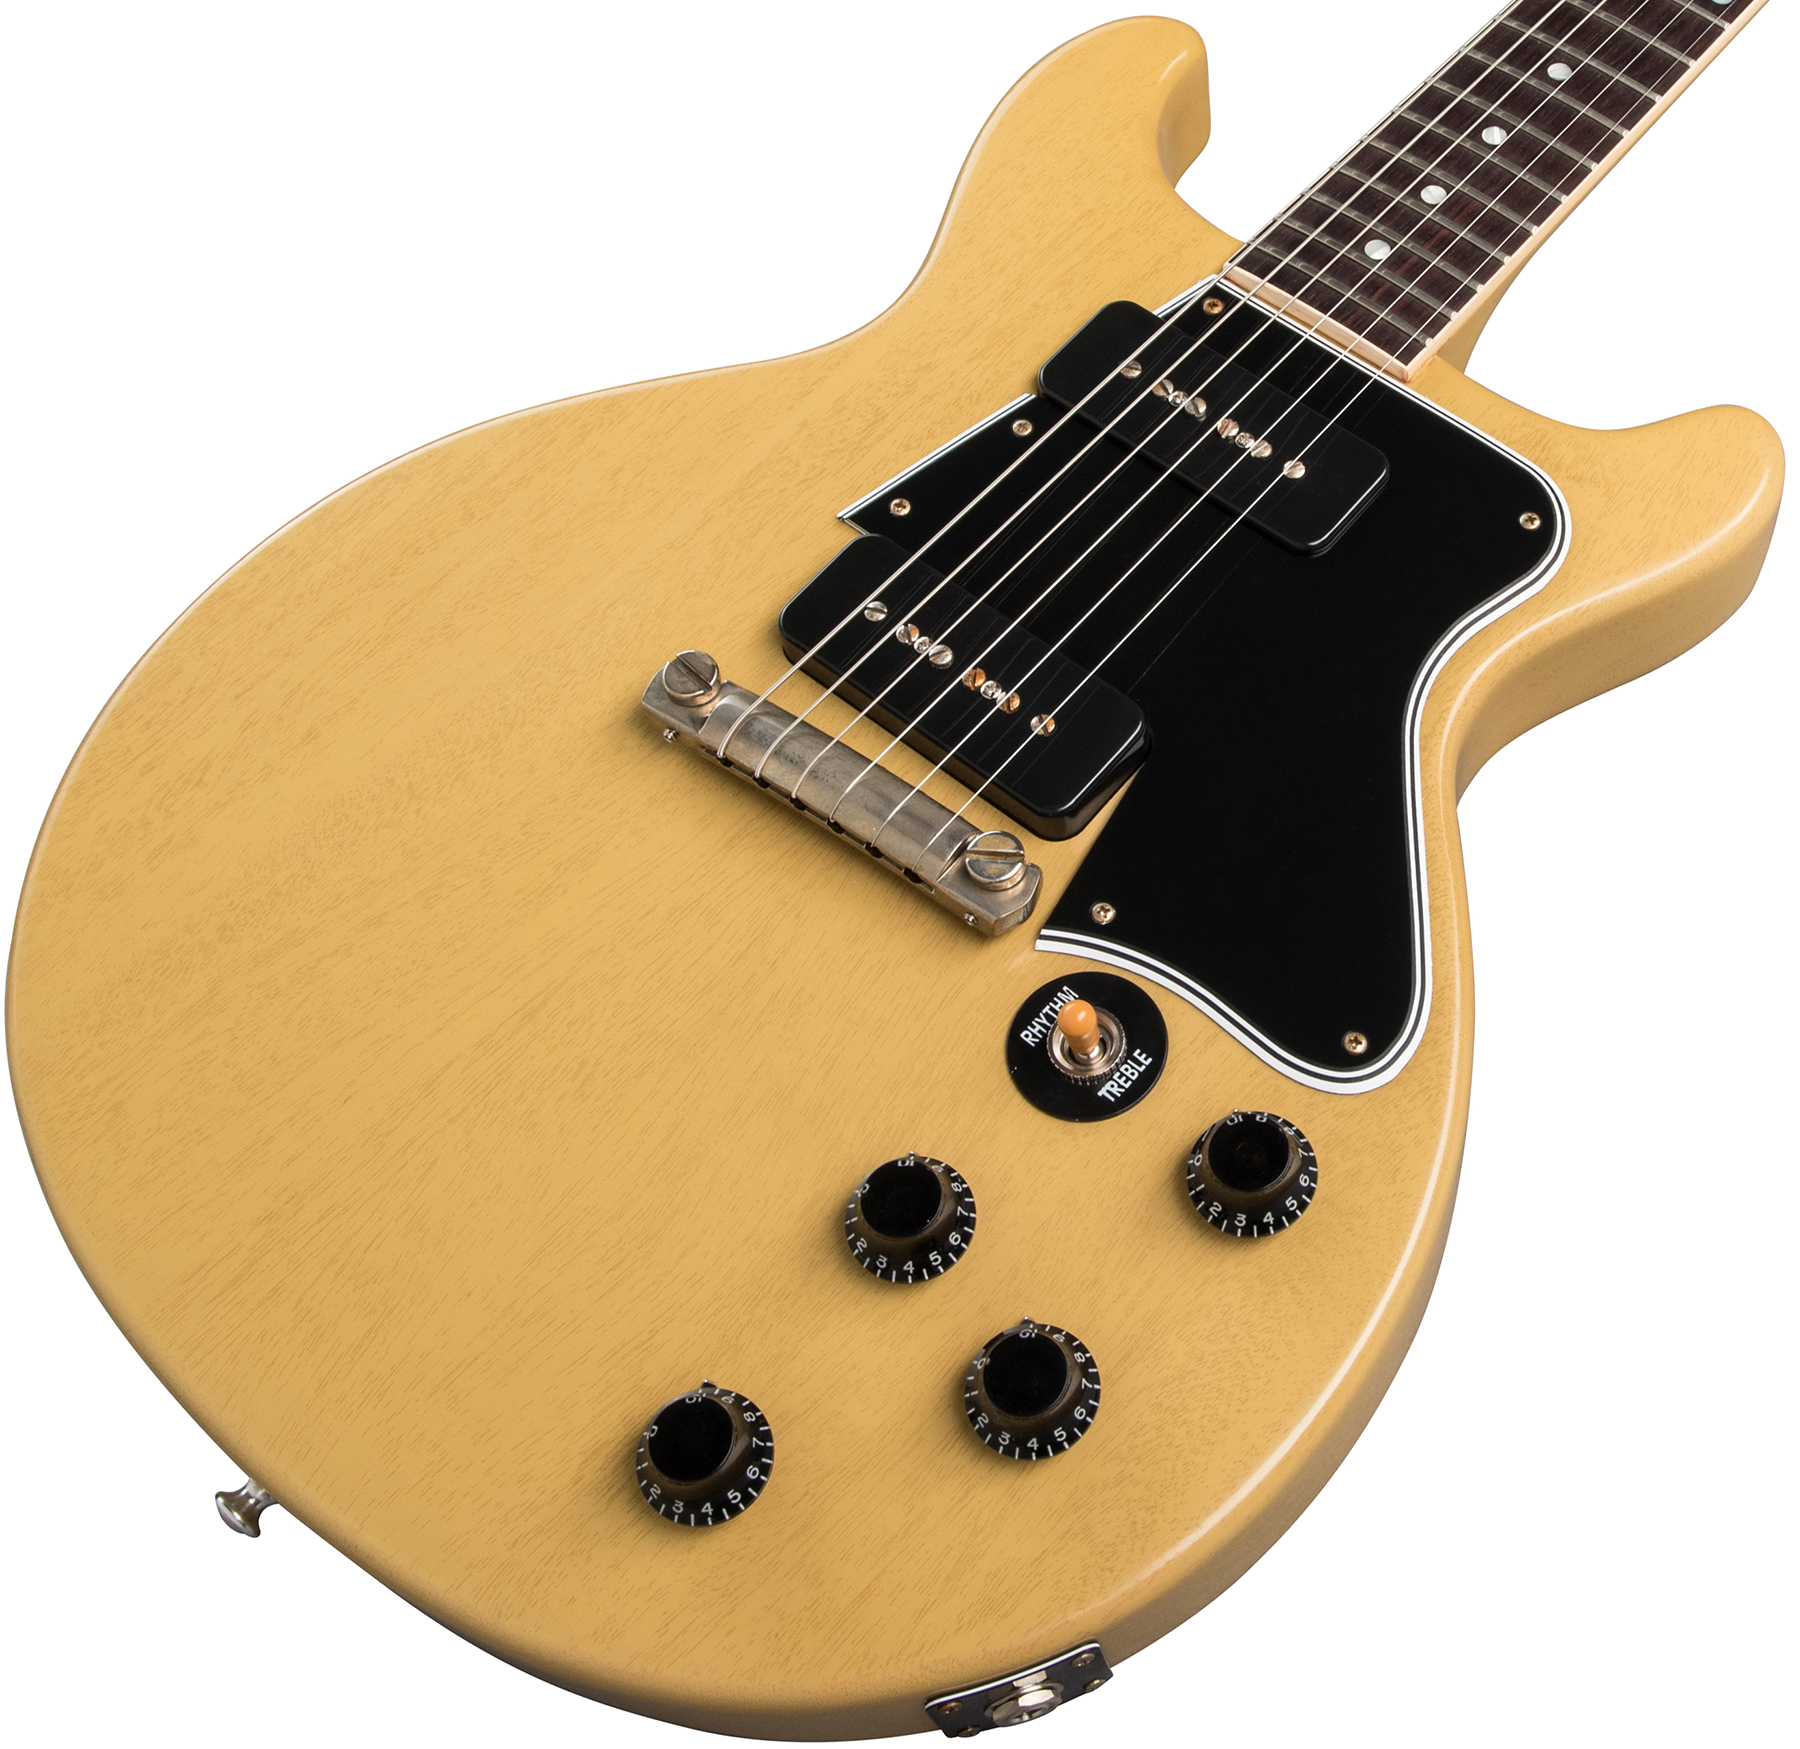 Gibson Custom Shop 1960 Les Paul Special Double Cut Reissue 19 Vos Tv Yellow Solid Body Electric Guitar Yellow